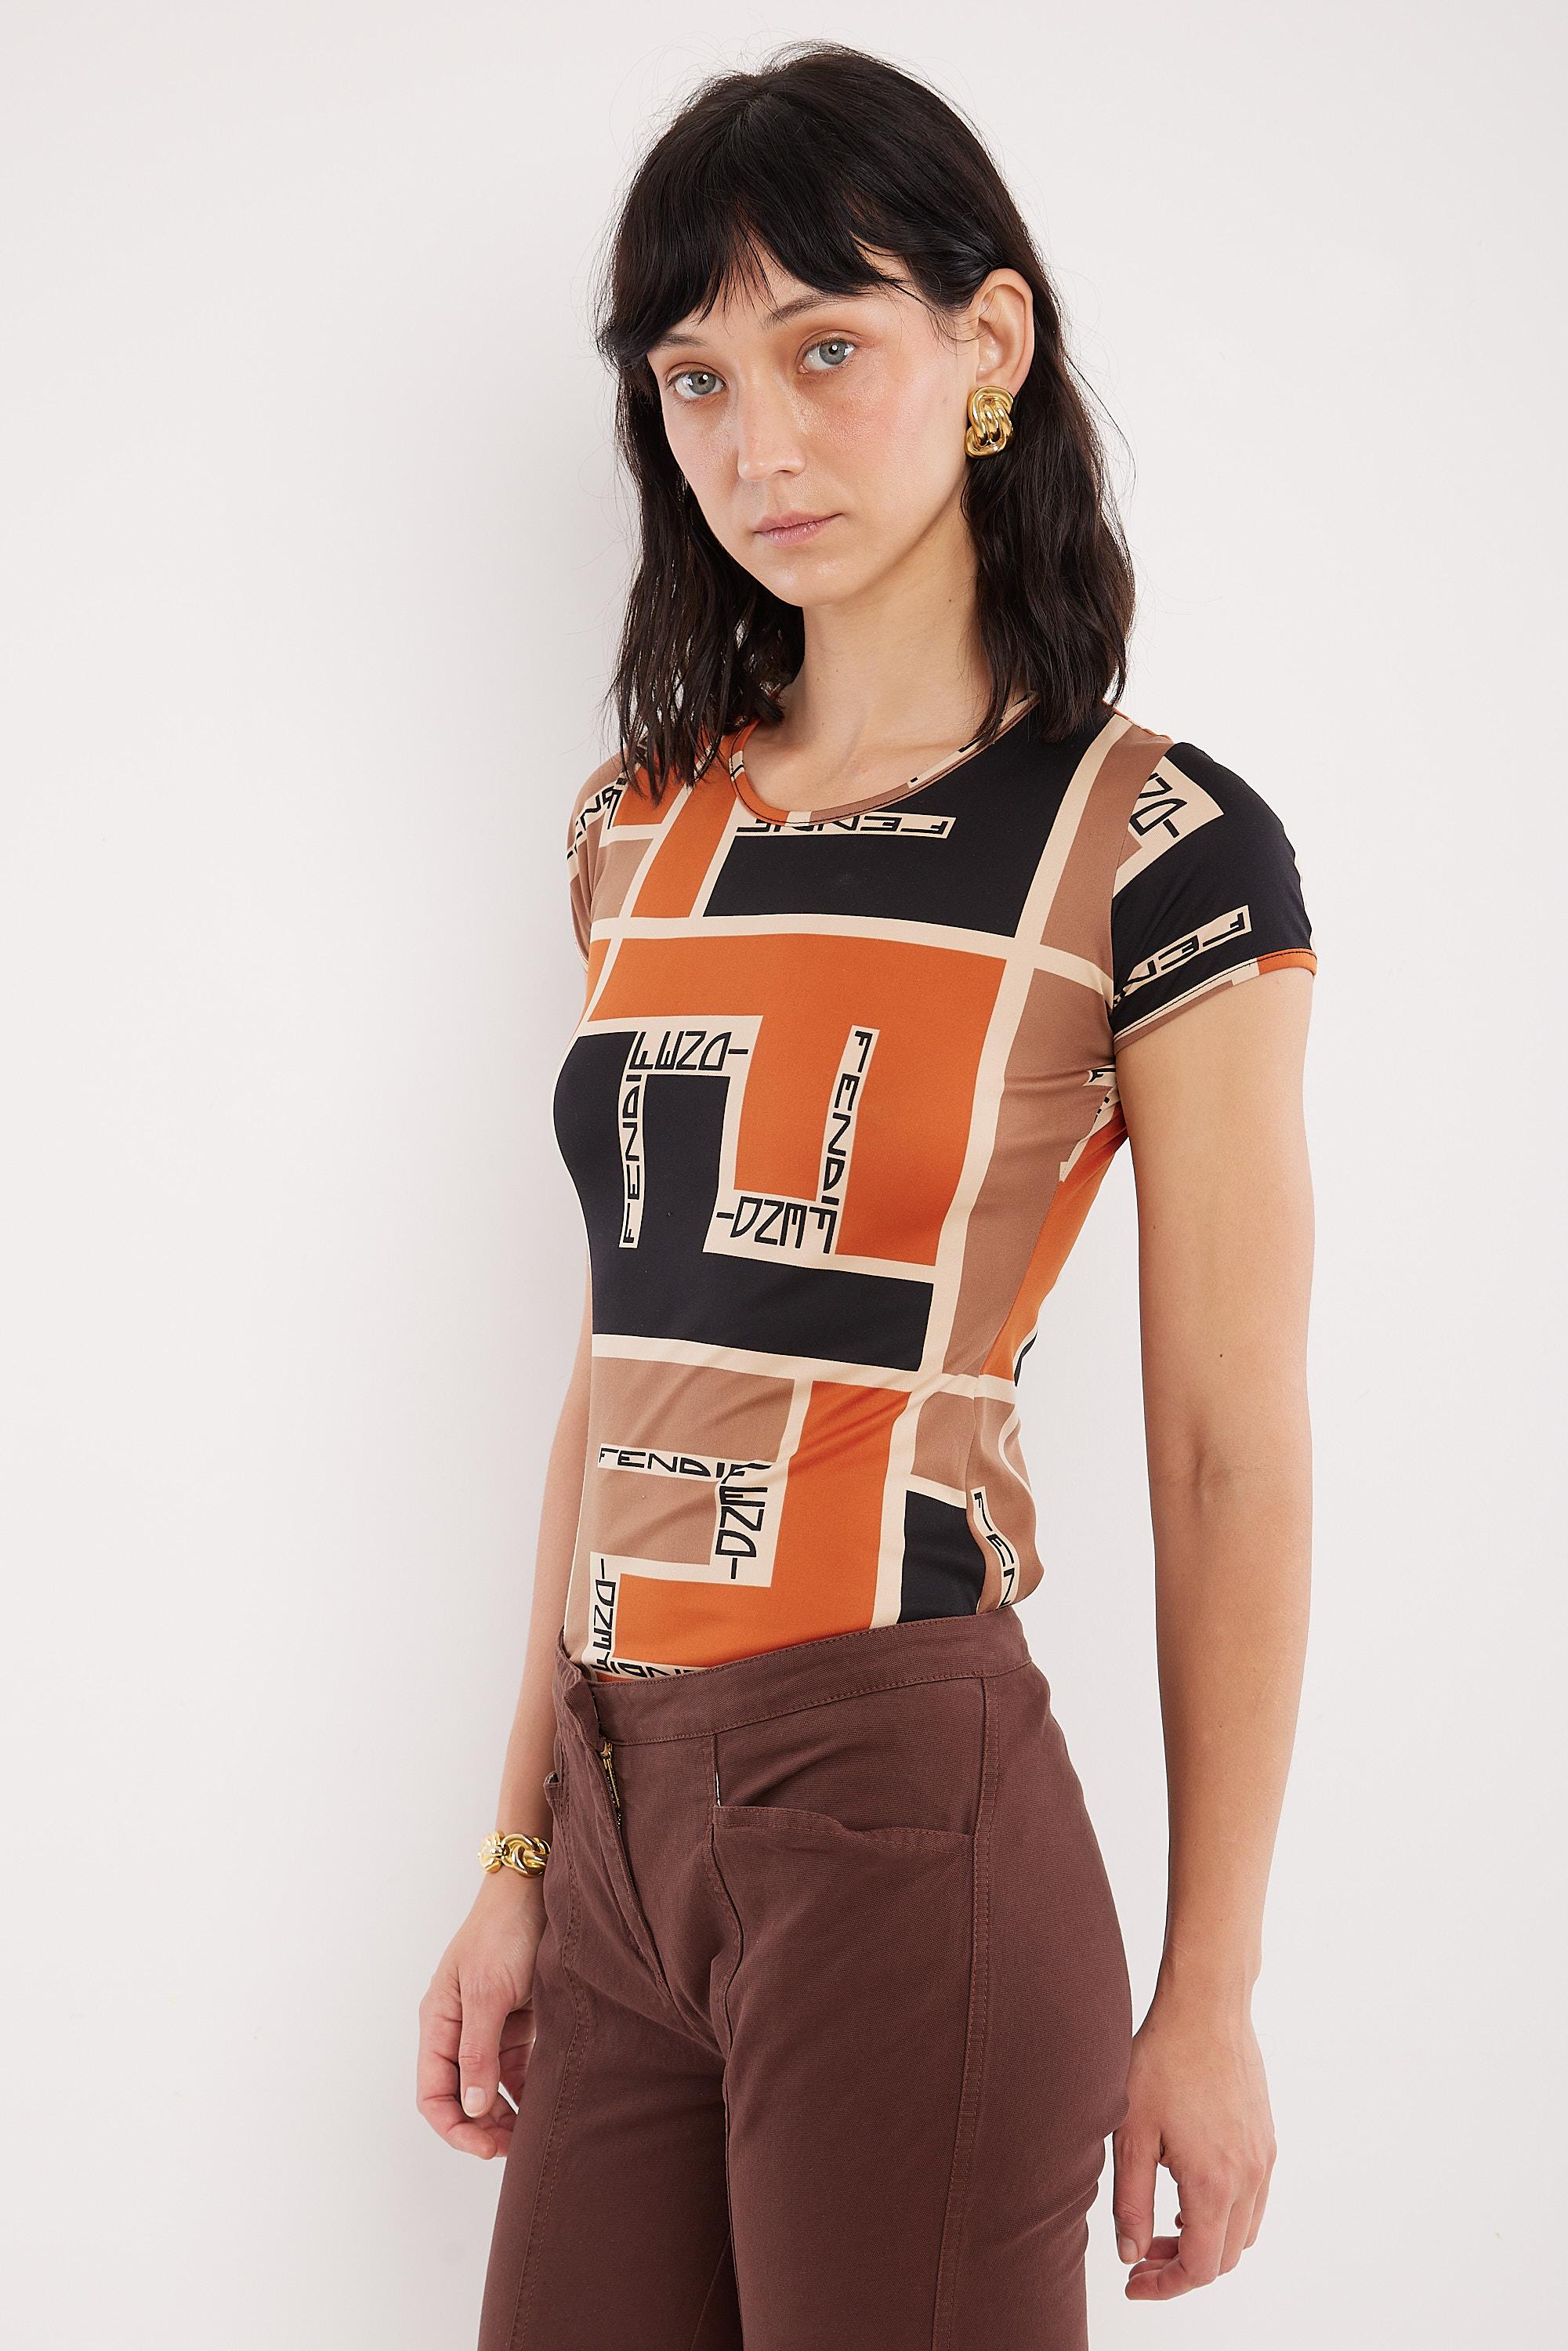 Dating to the 90's, this Fendi Mare top features a vintage inflected logo print that was recently revived by current Fendi creative director Kim Jones for the S/S 2024 collection. A classic crew neck t-shirt style with shrunken proportions, it is